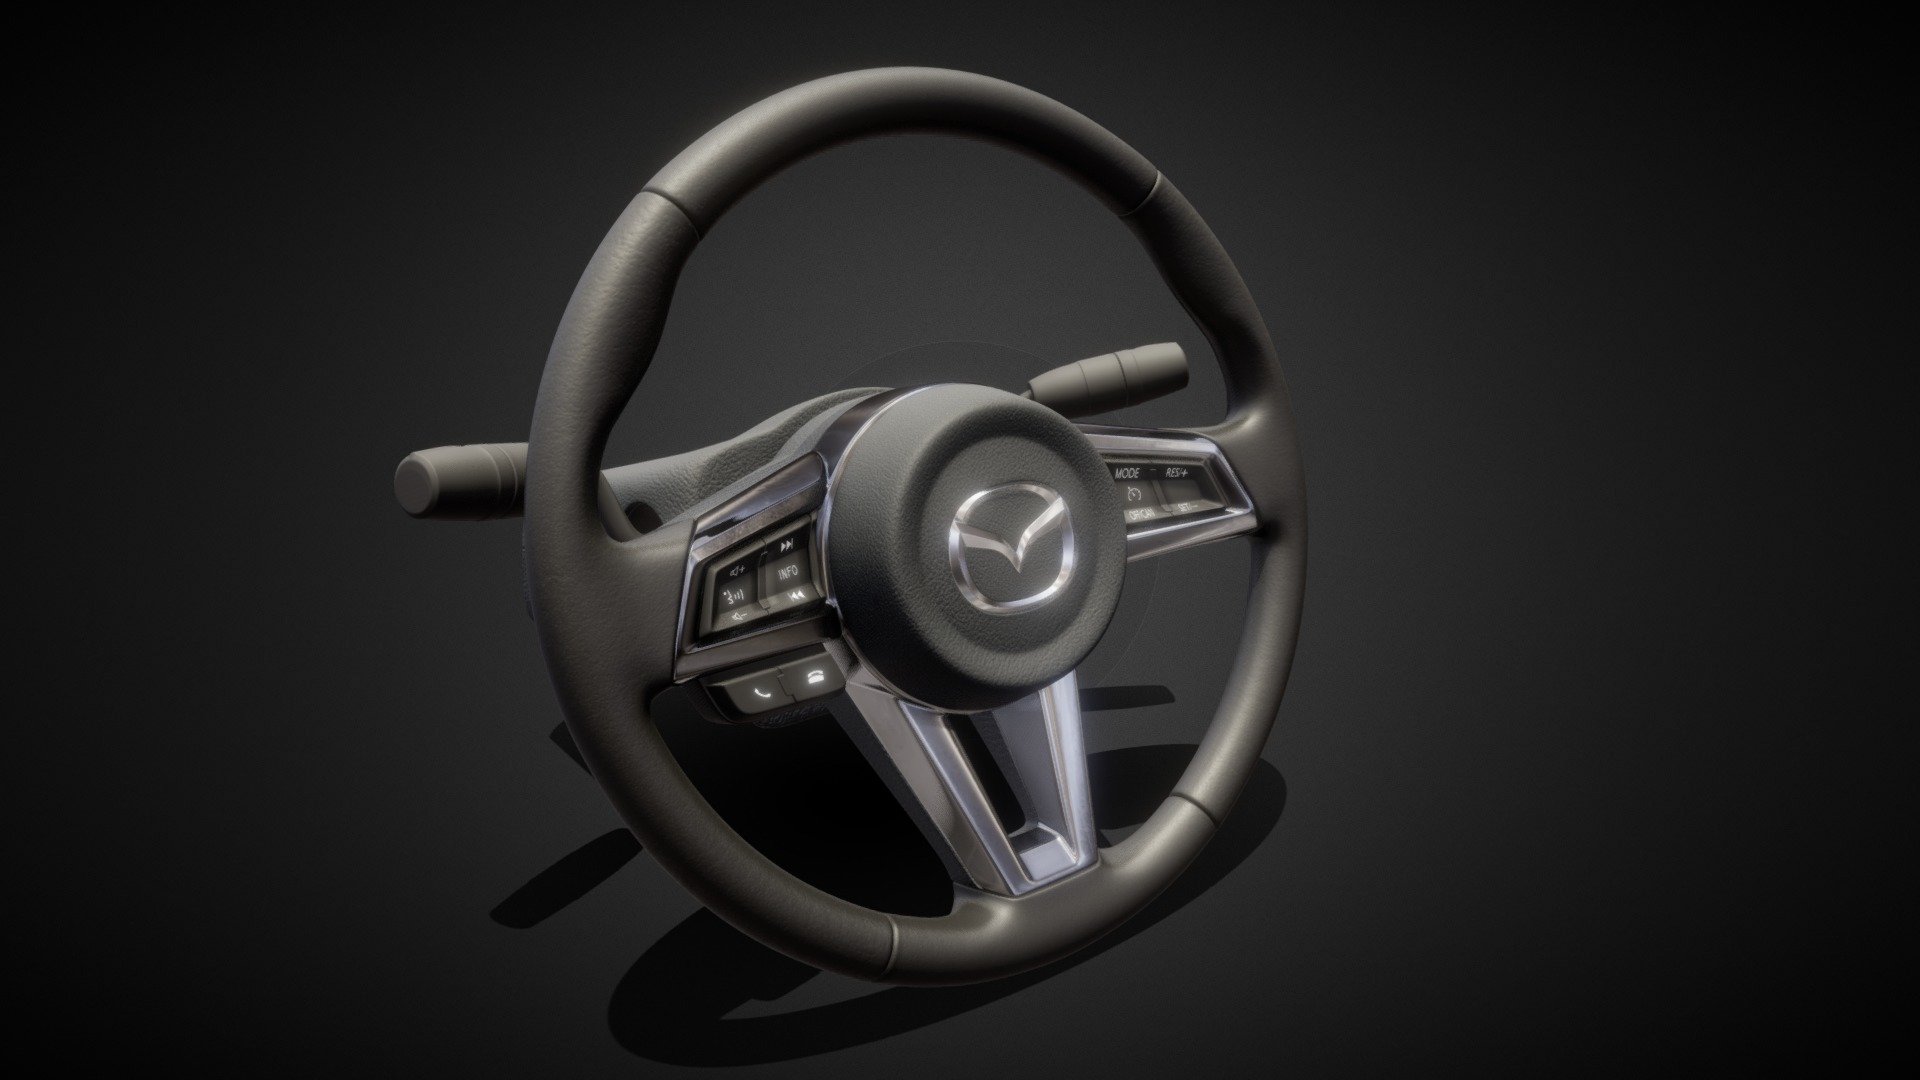 Hi! This is the steering wheel of a Mazda car. I made the model very detailed and so it fits into the interior for very accurate visualizations 3d model